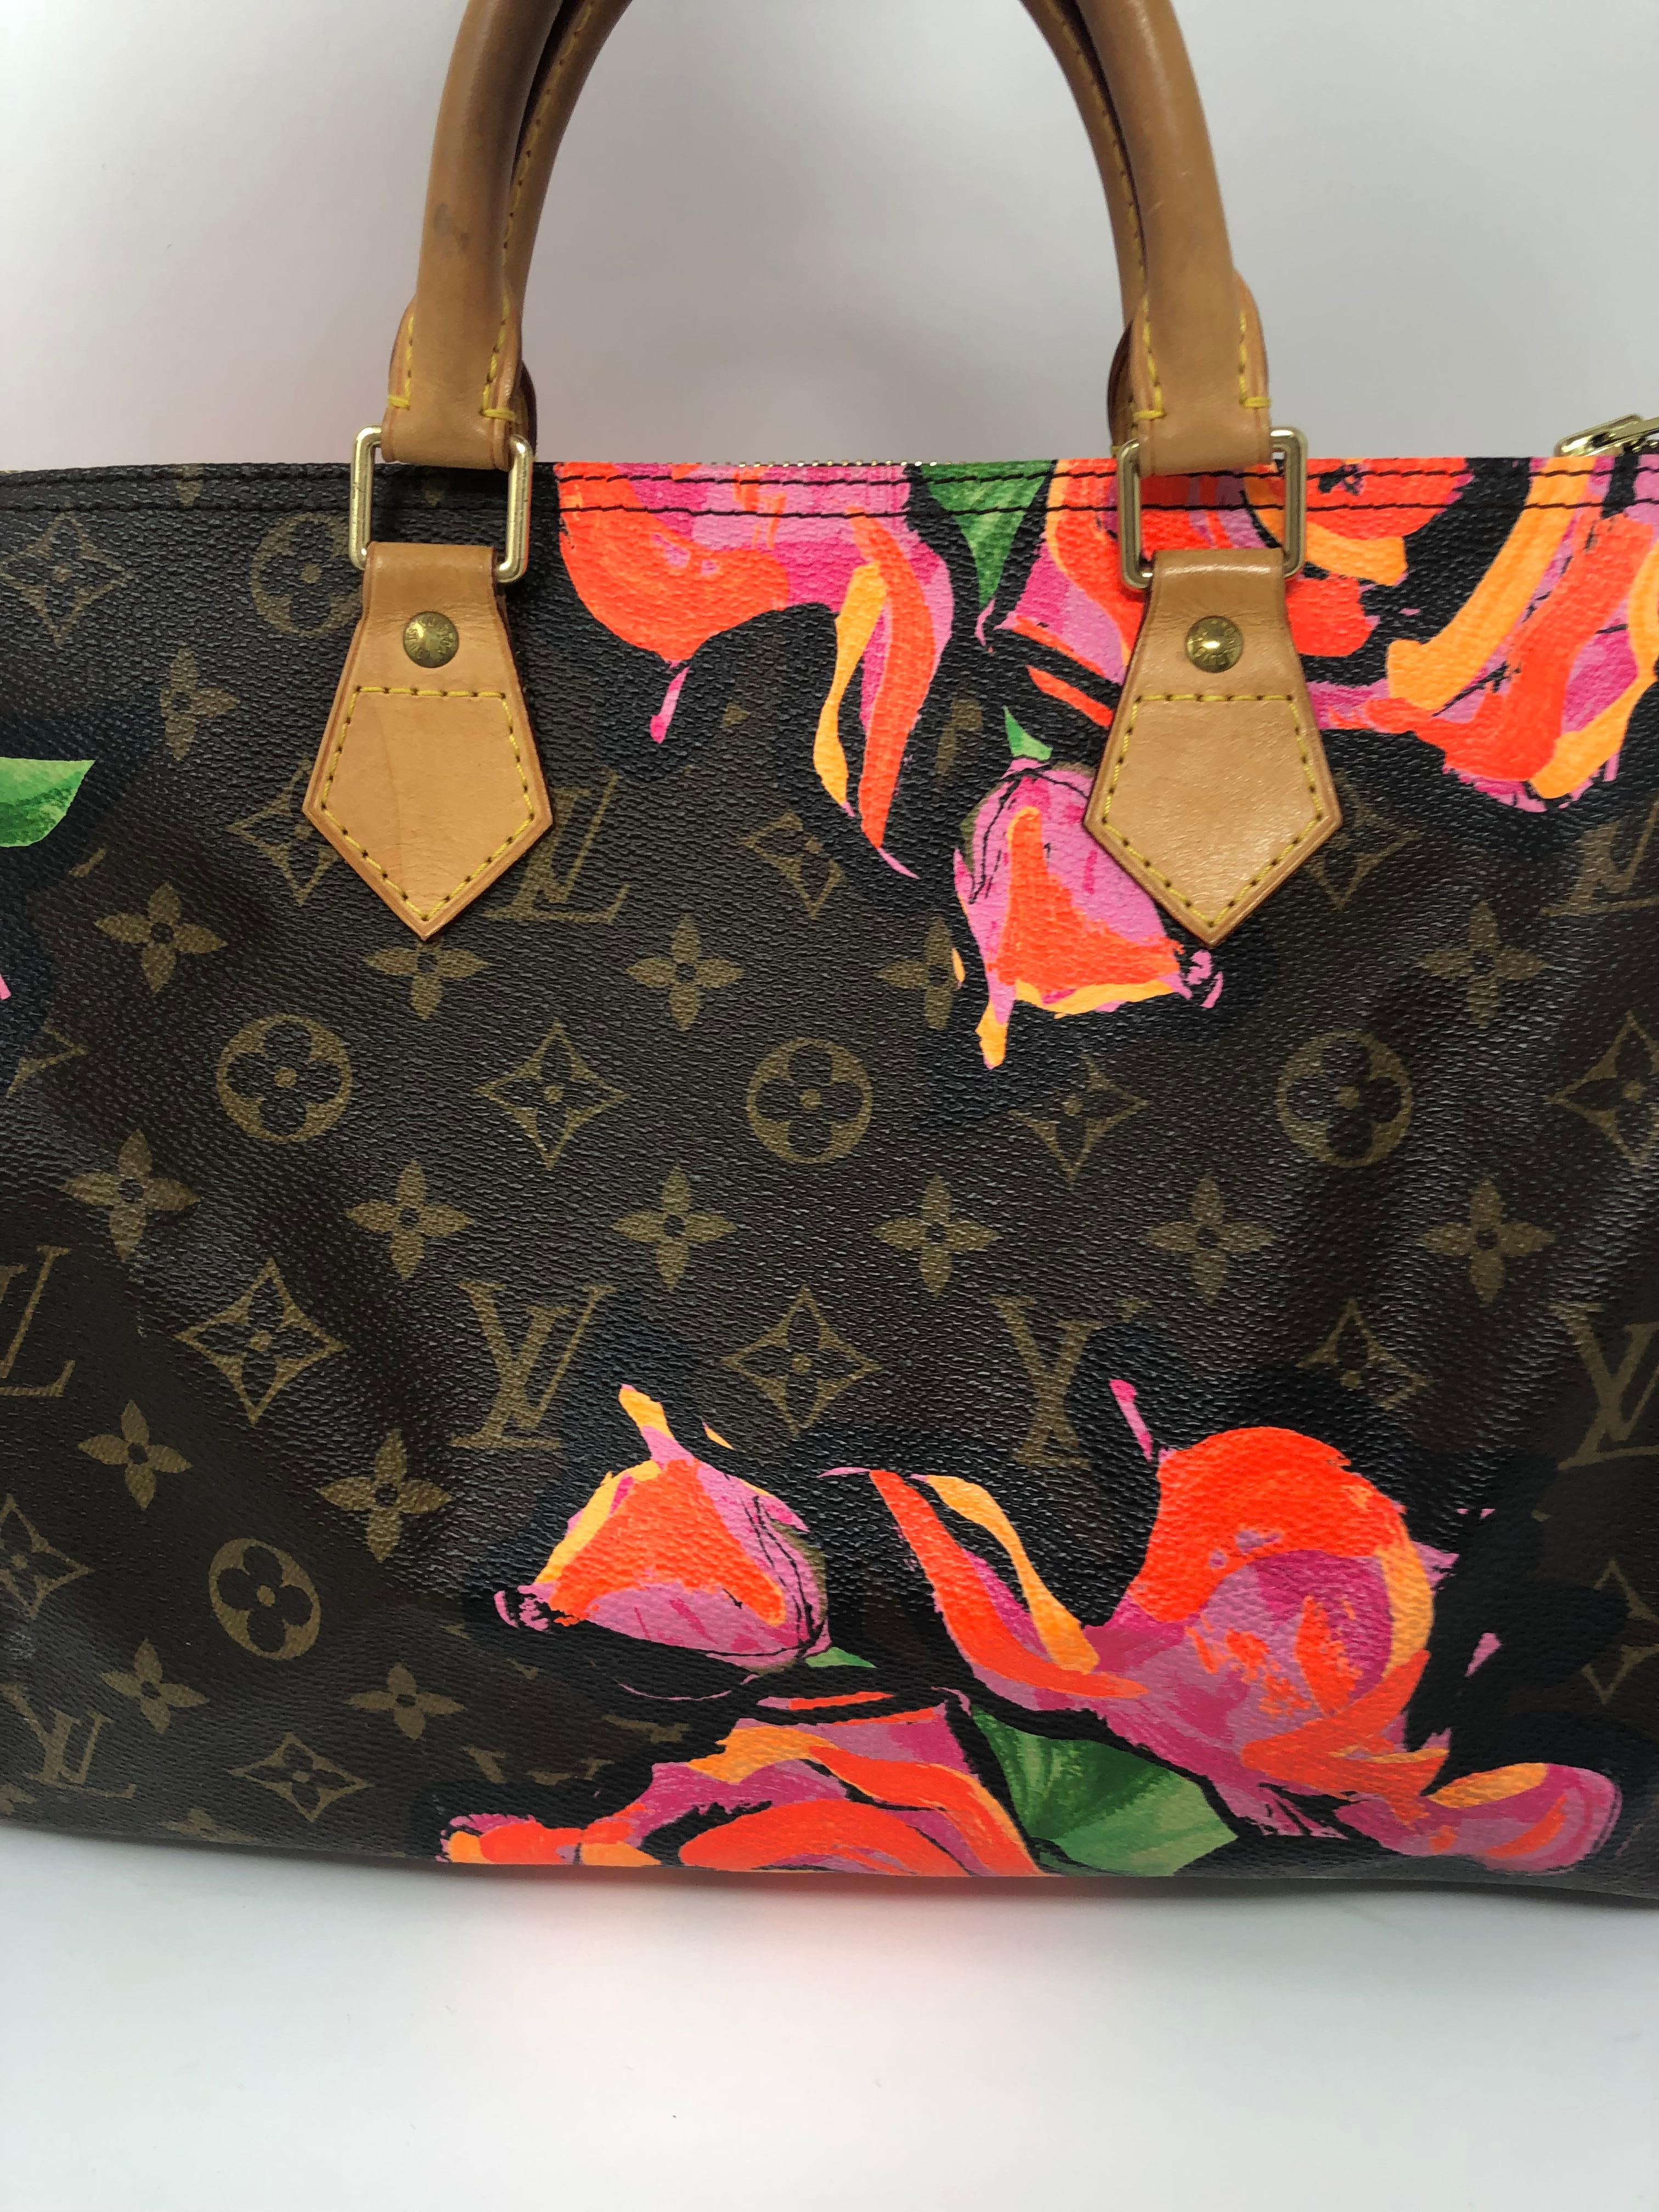 Louis Vuitton Roses by Stephen Sprouse Speedy 30. Rare and limited art bag. Good condition. Guaranteed authentic. 